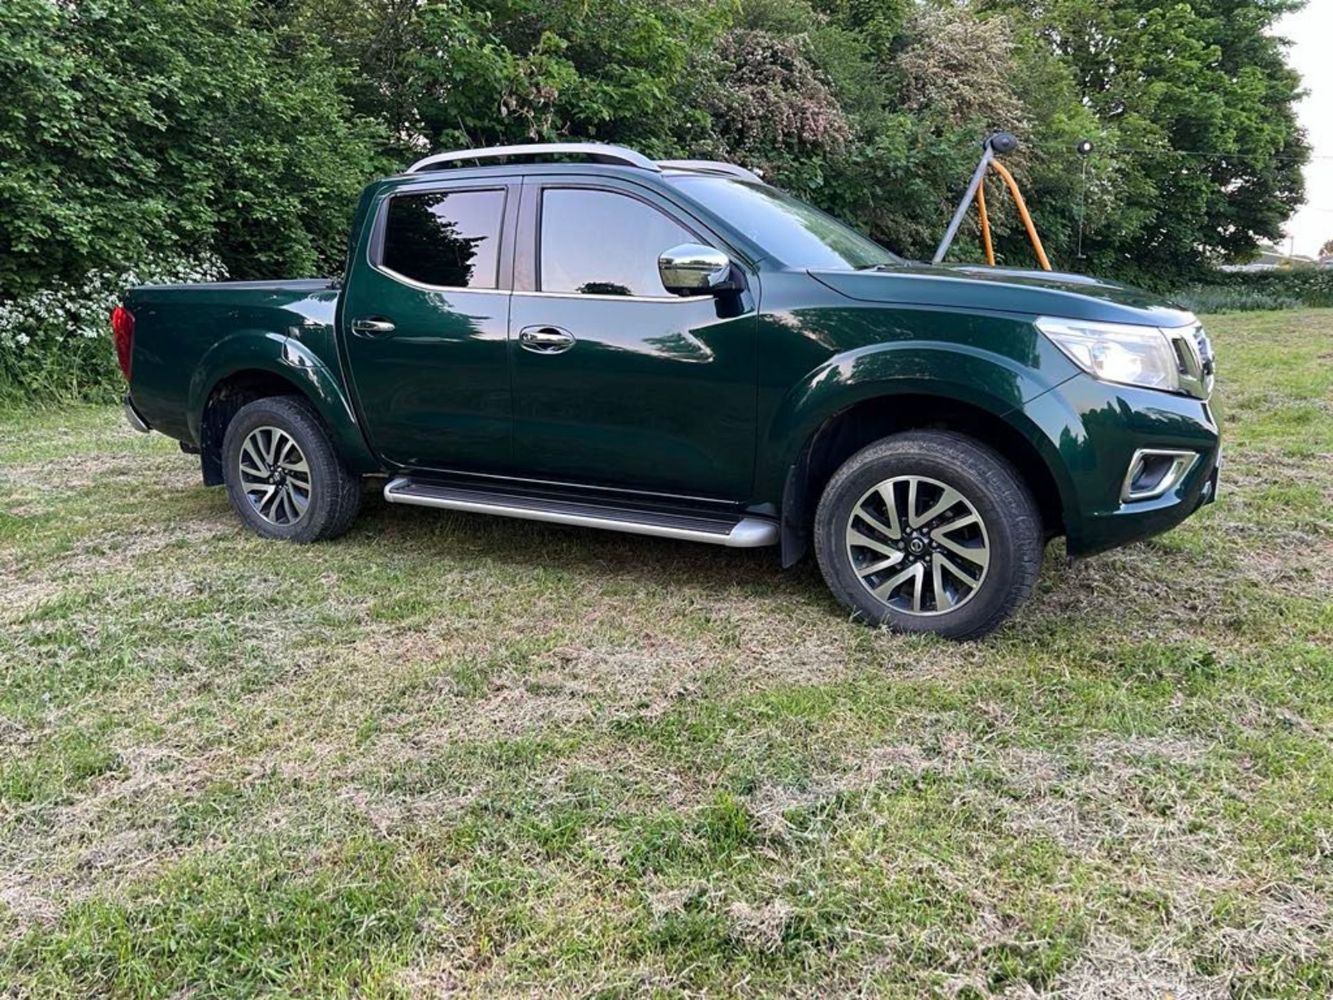 THURSDAY 6PM! 2019 NISSAN NAVARA TEKNA 190 4WD, MANITOU, TEREX, BOMAG, PLYMOUTH PROWLER, EV VEHICLES, TRACTORS, MOWERS, VANS & MUCH MORE!